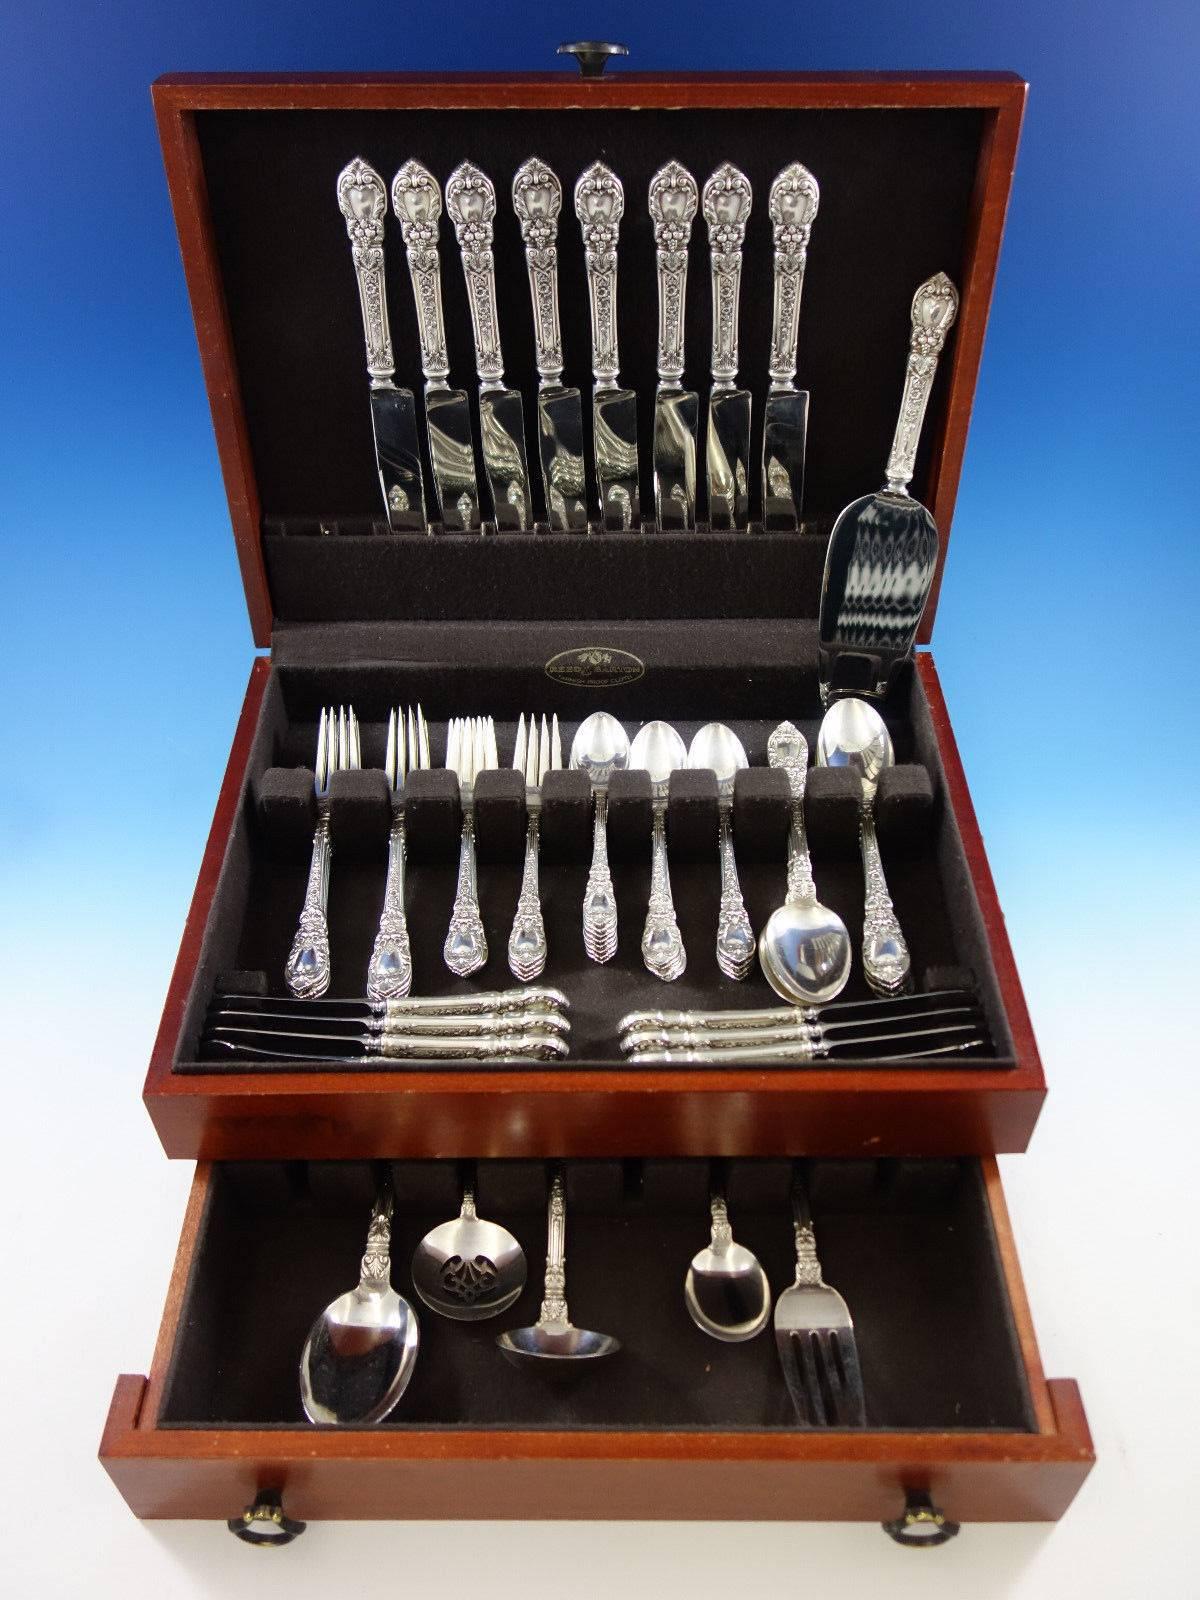 Dinner size Charles II by Lunt sterling silver flatware set of 62 pieces. This set includes: 

Eight dinner size knives, 9 3/4